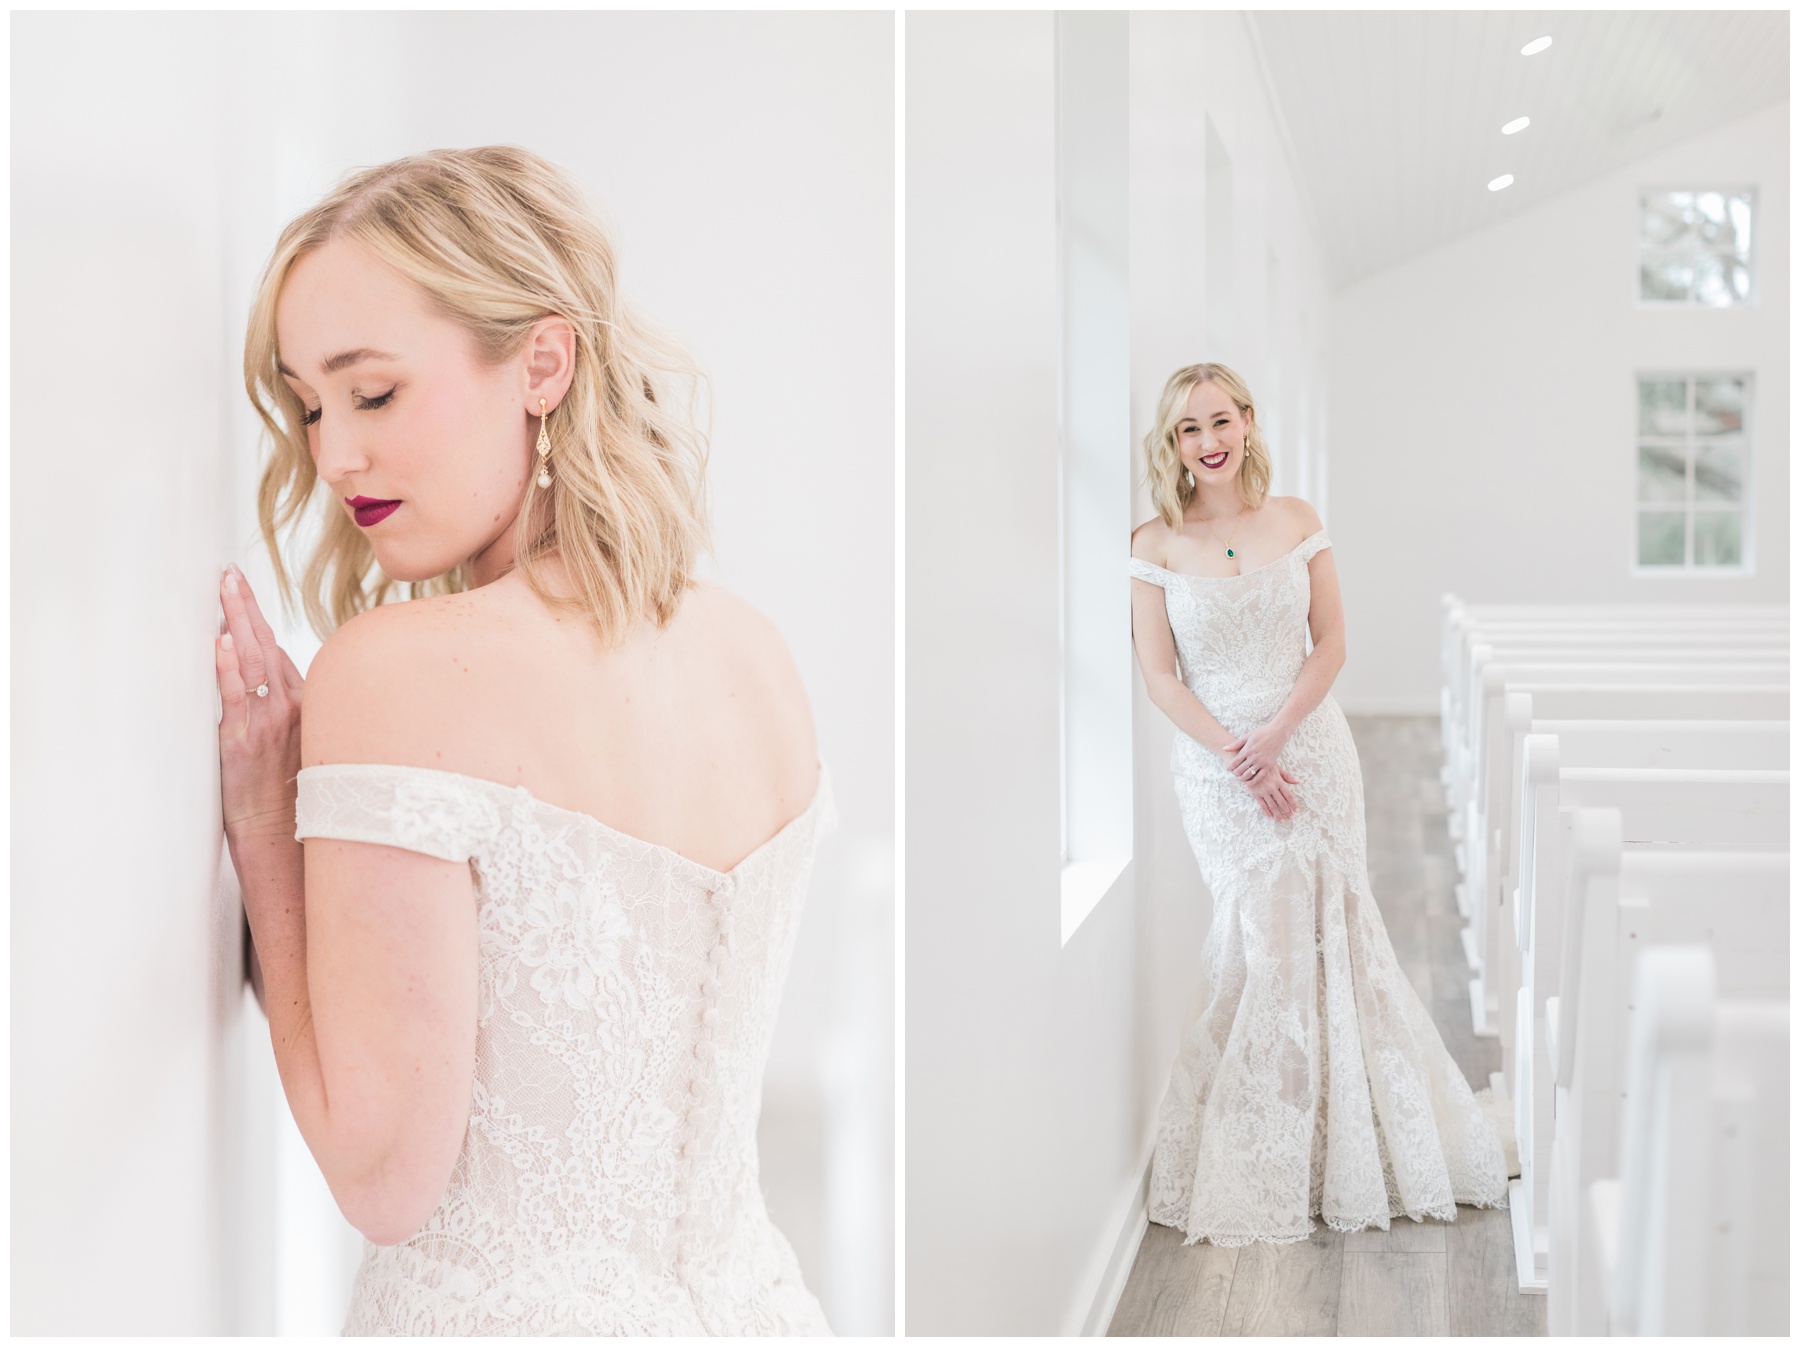 Bride in an off-the-shoulder lace gown for her bridal session at Addison Woods